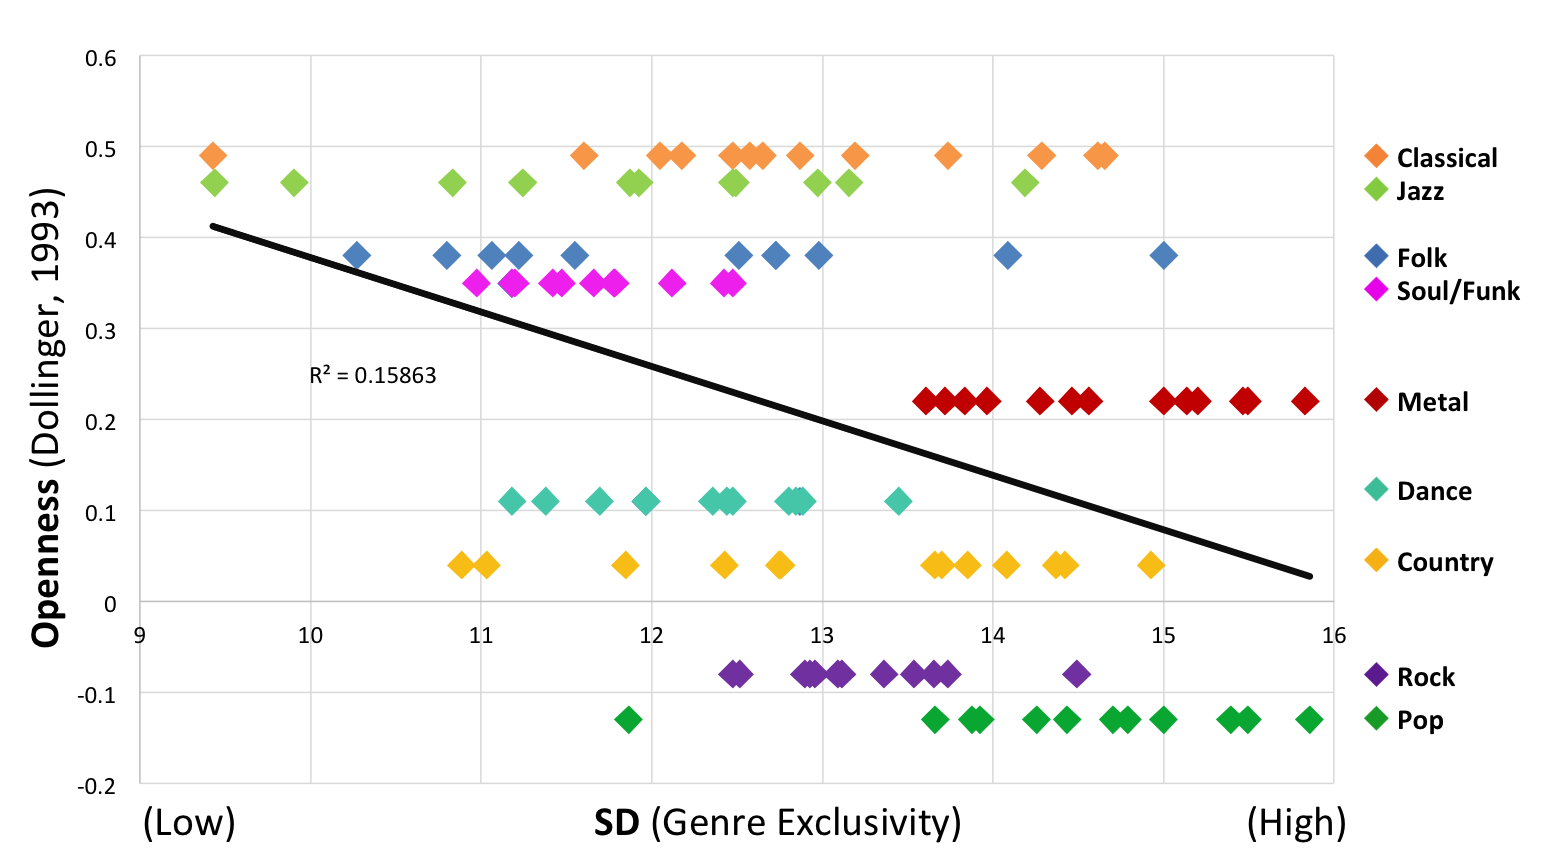 Scatterplot of openness against genre exclusivity.
        X-axis shows median SD per x-head subgroup per country;
        y-axis shows openness levels per genre from Dollinger (1993).